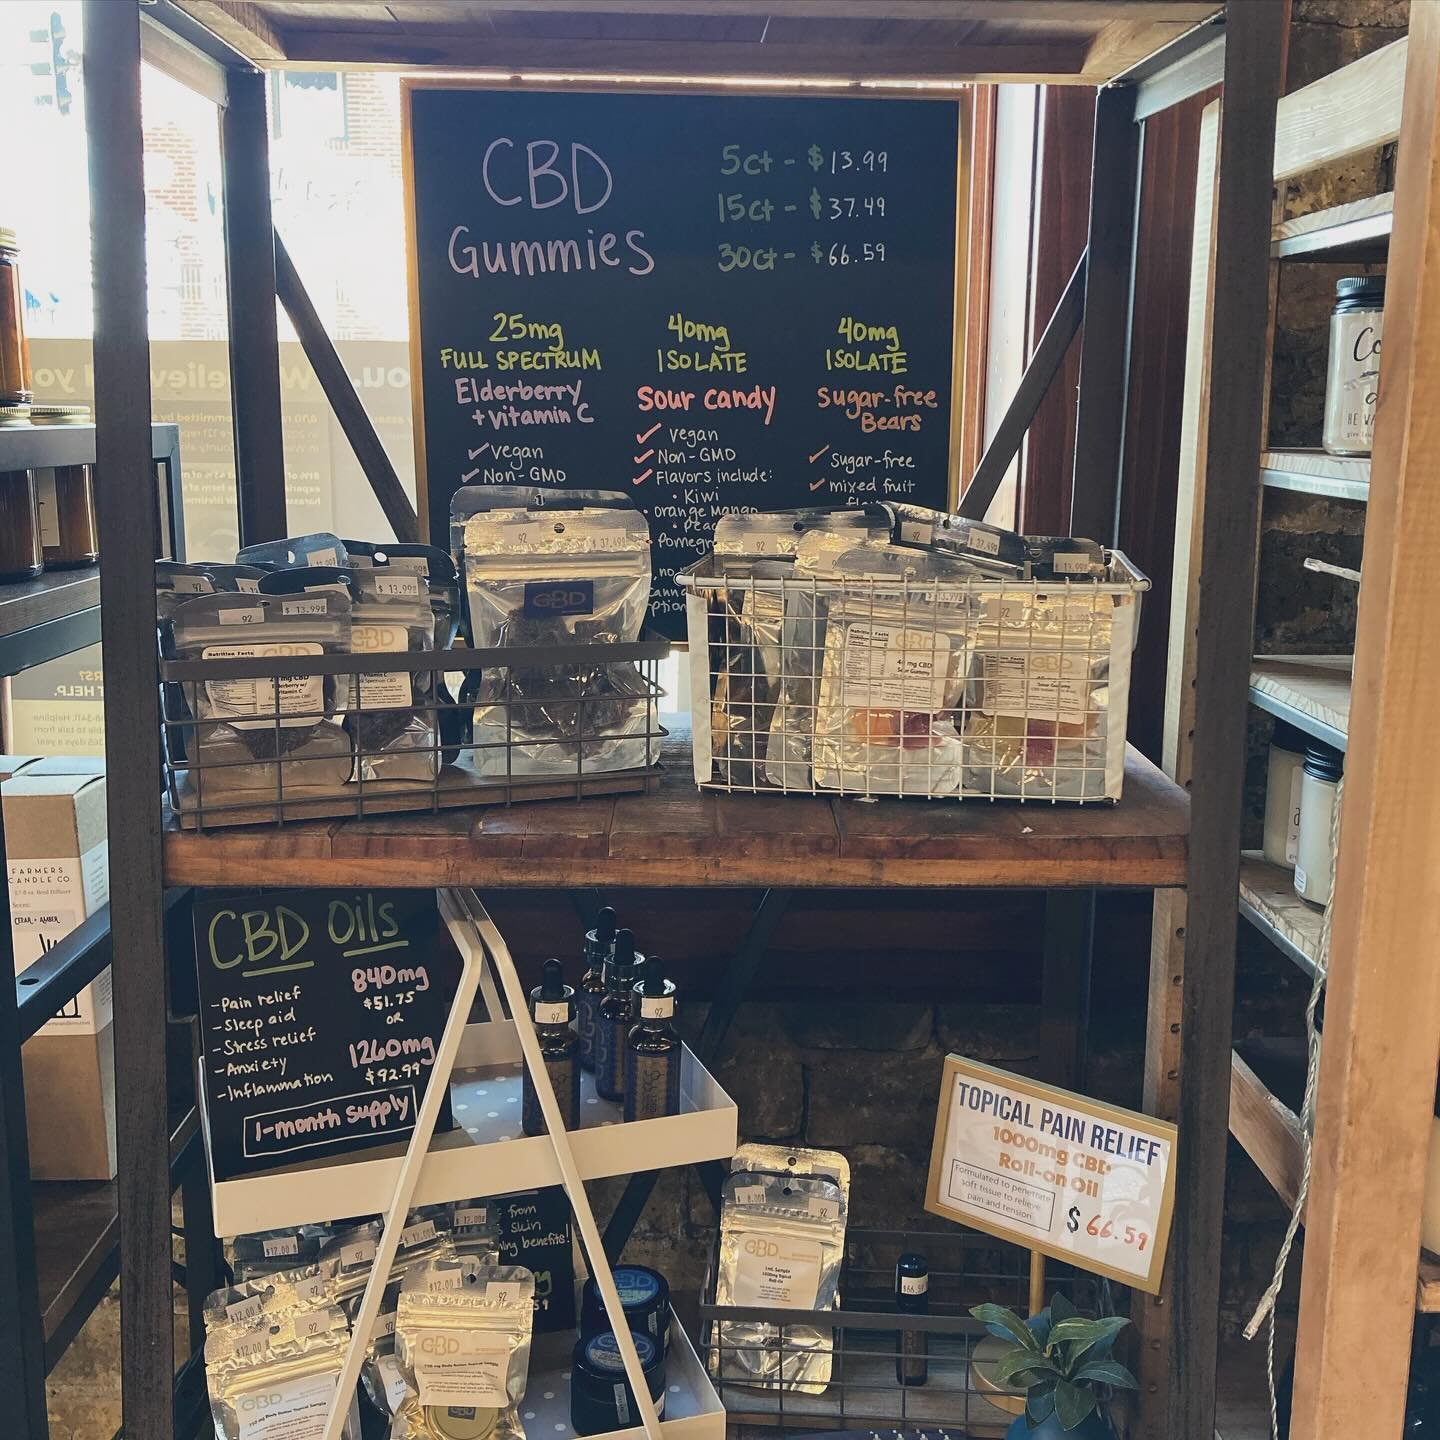 @cbdbydesign has the best CBD products! Stop in this weekend, we have body butter, roll on, drink mix, tinctures, and gummies available.